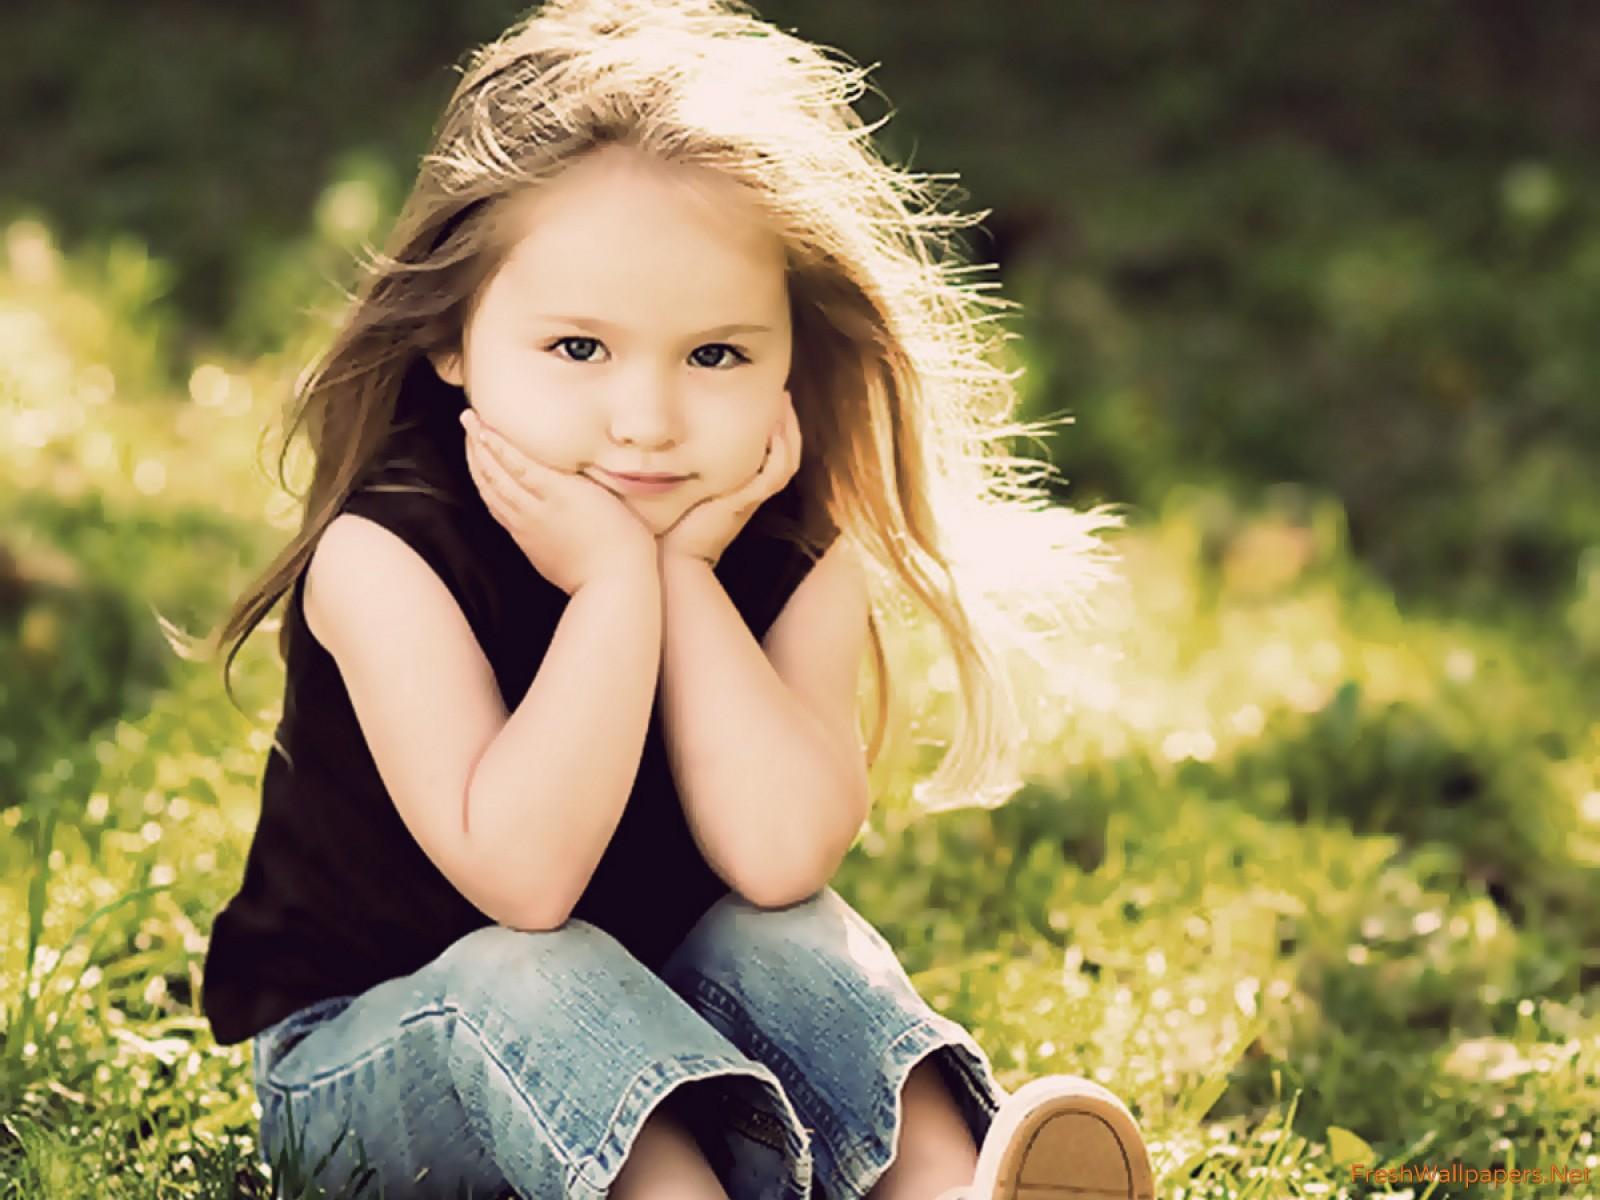 Adorable Little Girl Wallpapers - Wallpaper Cave.